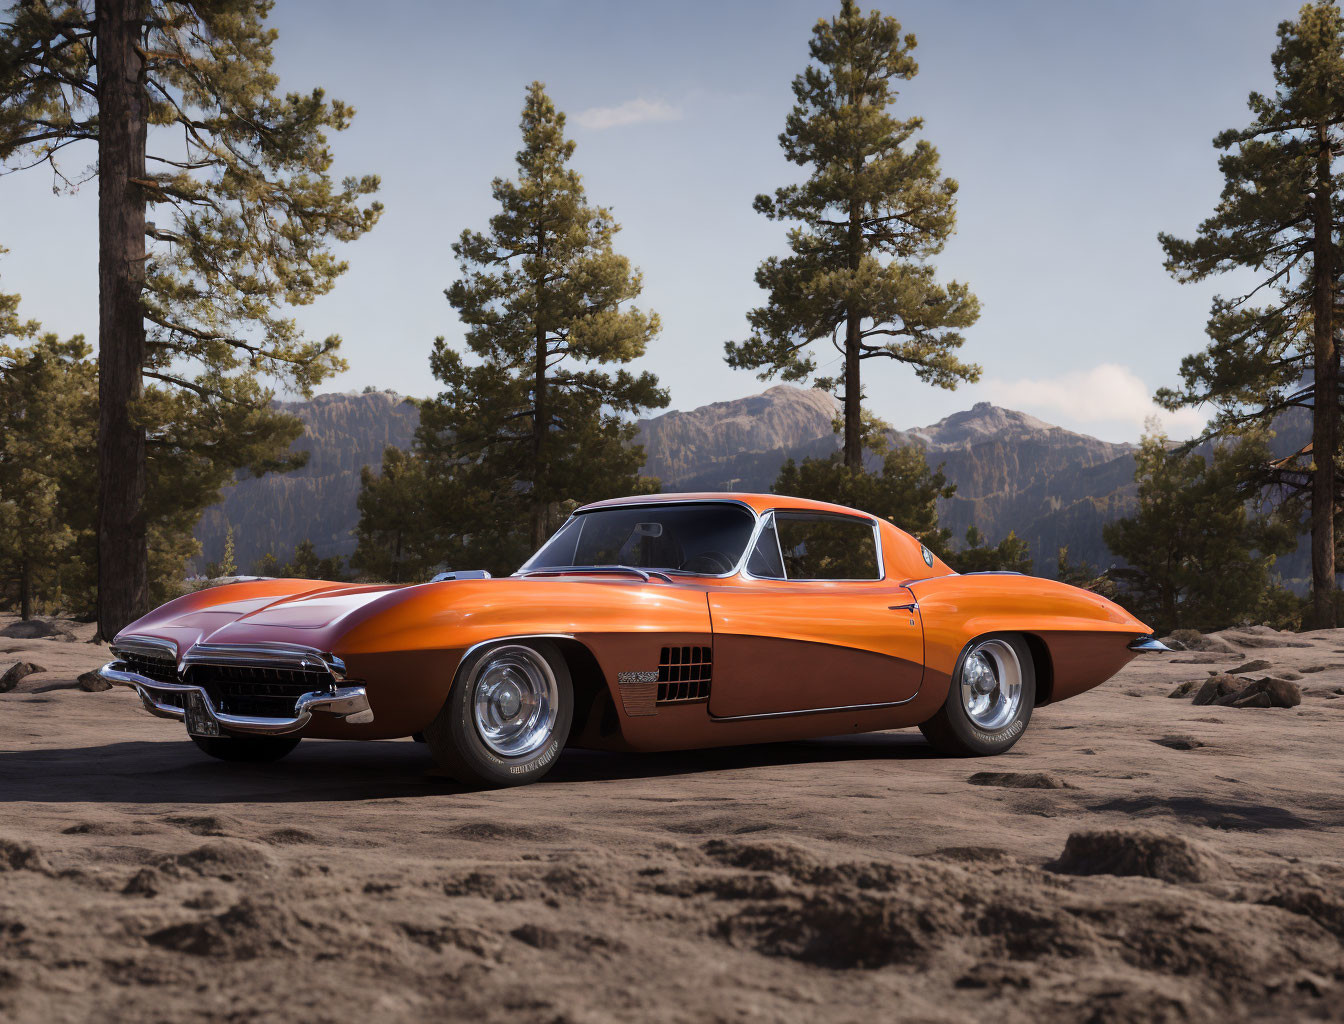 Vintage orange Corvette on dirt road surrounded by pine trees and mountains under clear blue sky